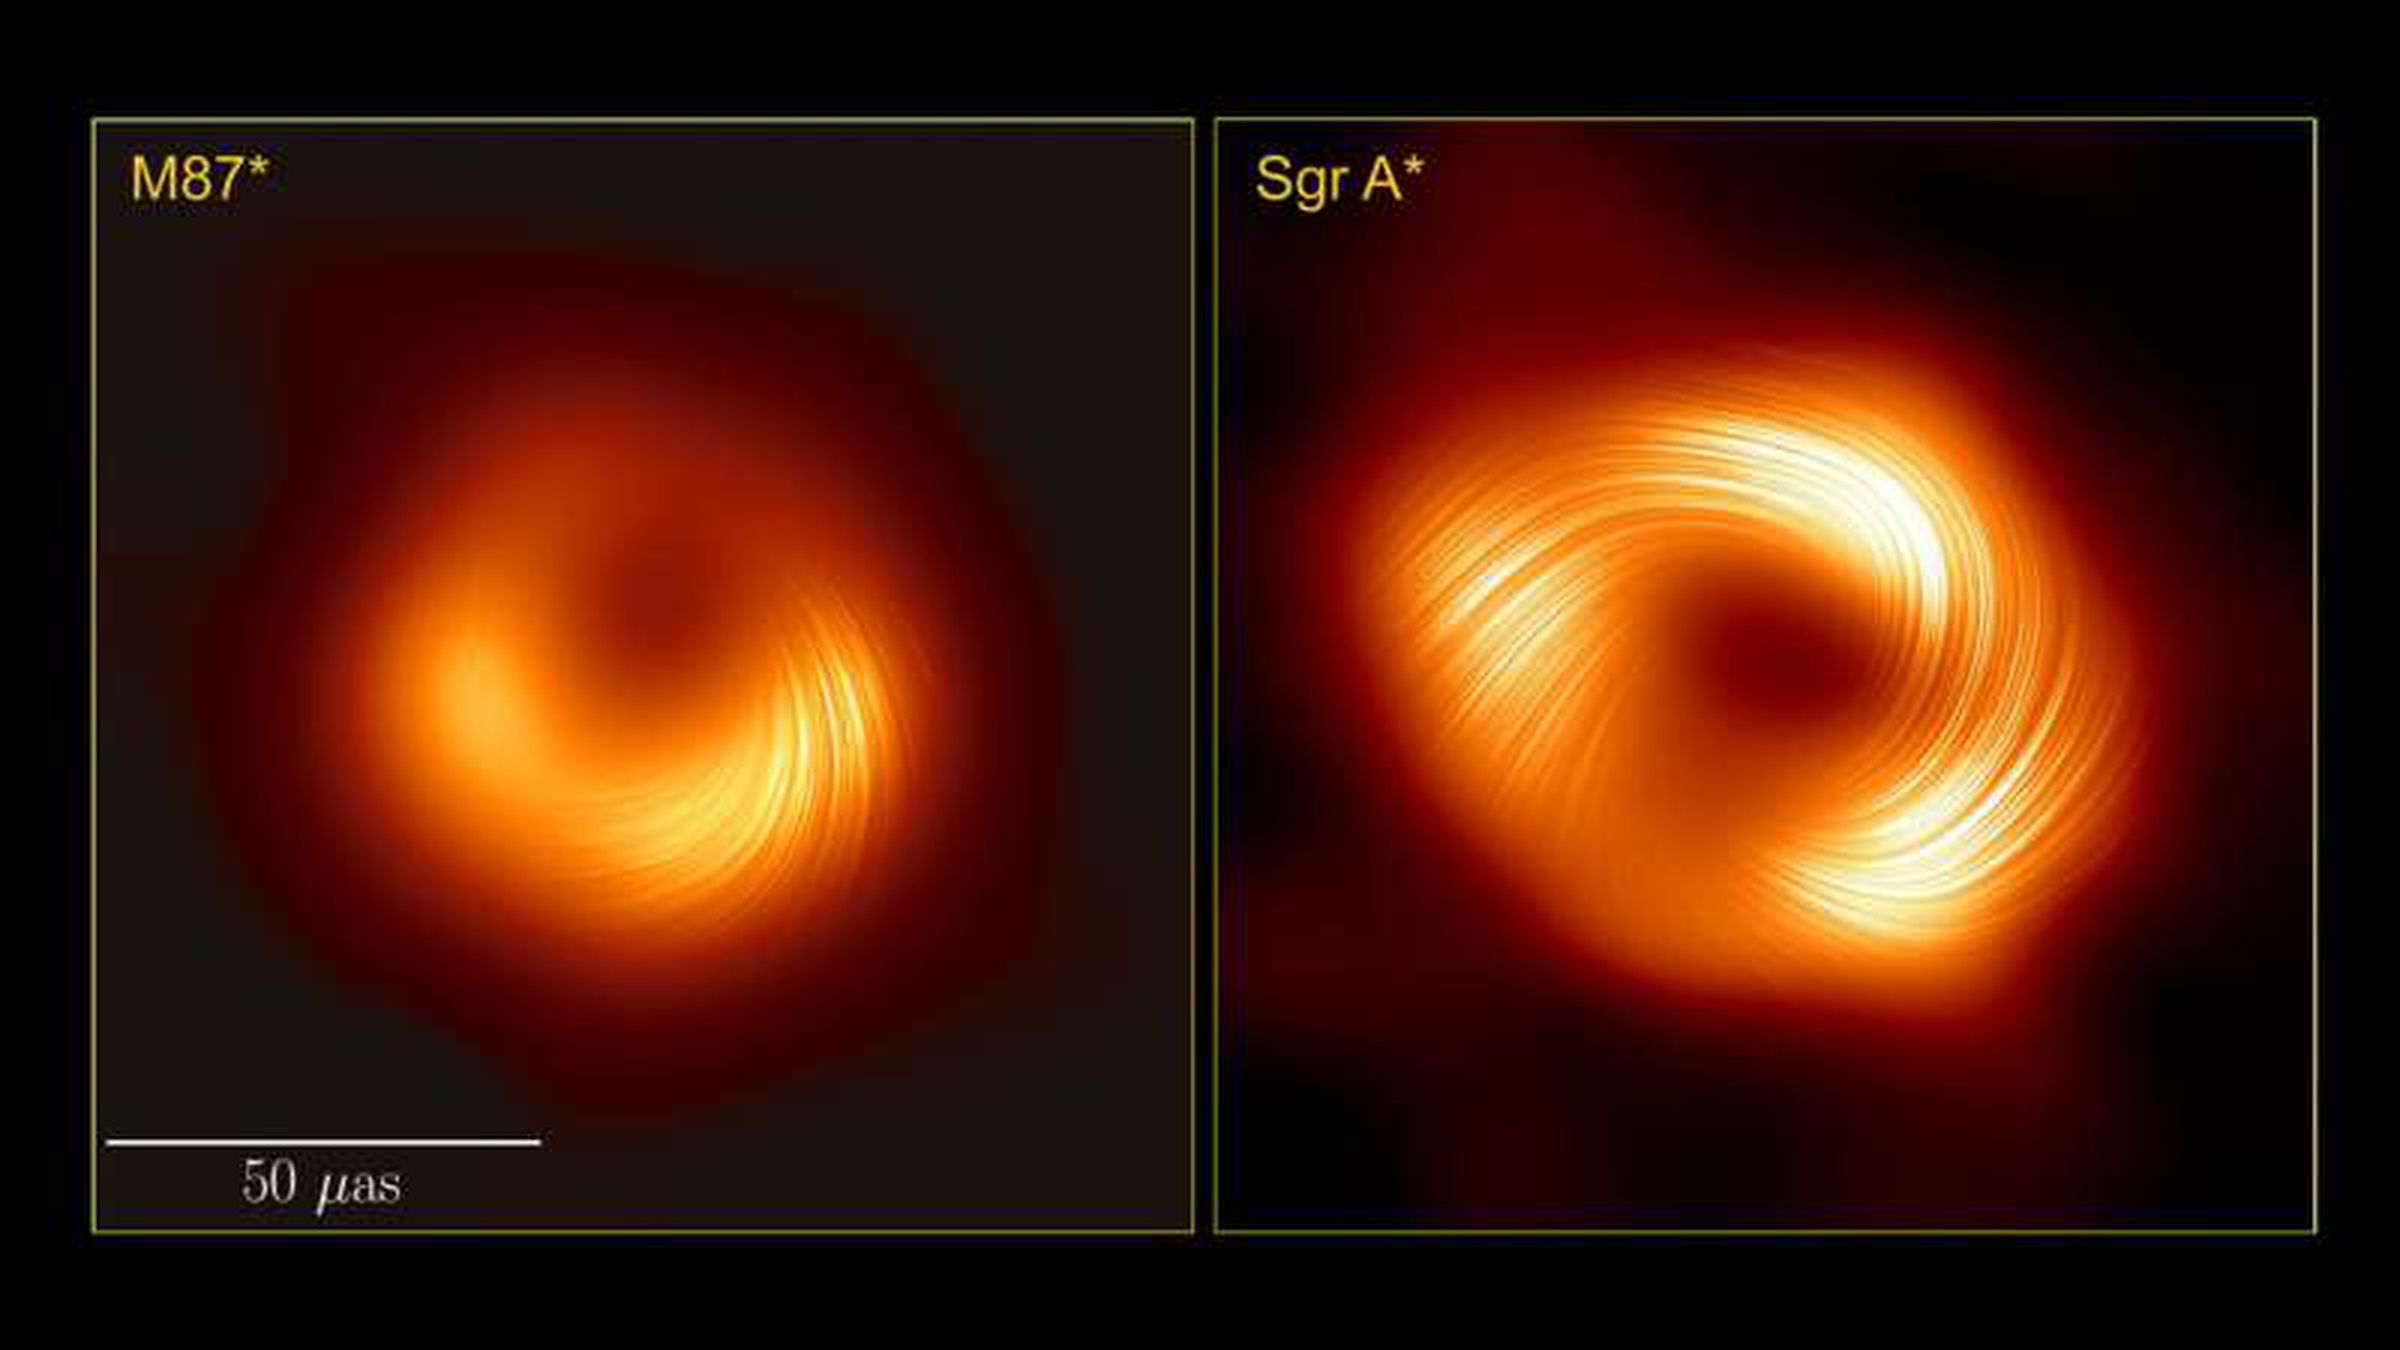 Comparison of the two black holes, each showing a magnetic pattern resembling that of water going down a drain.